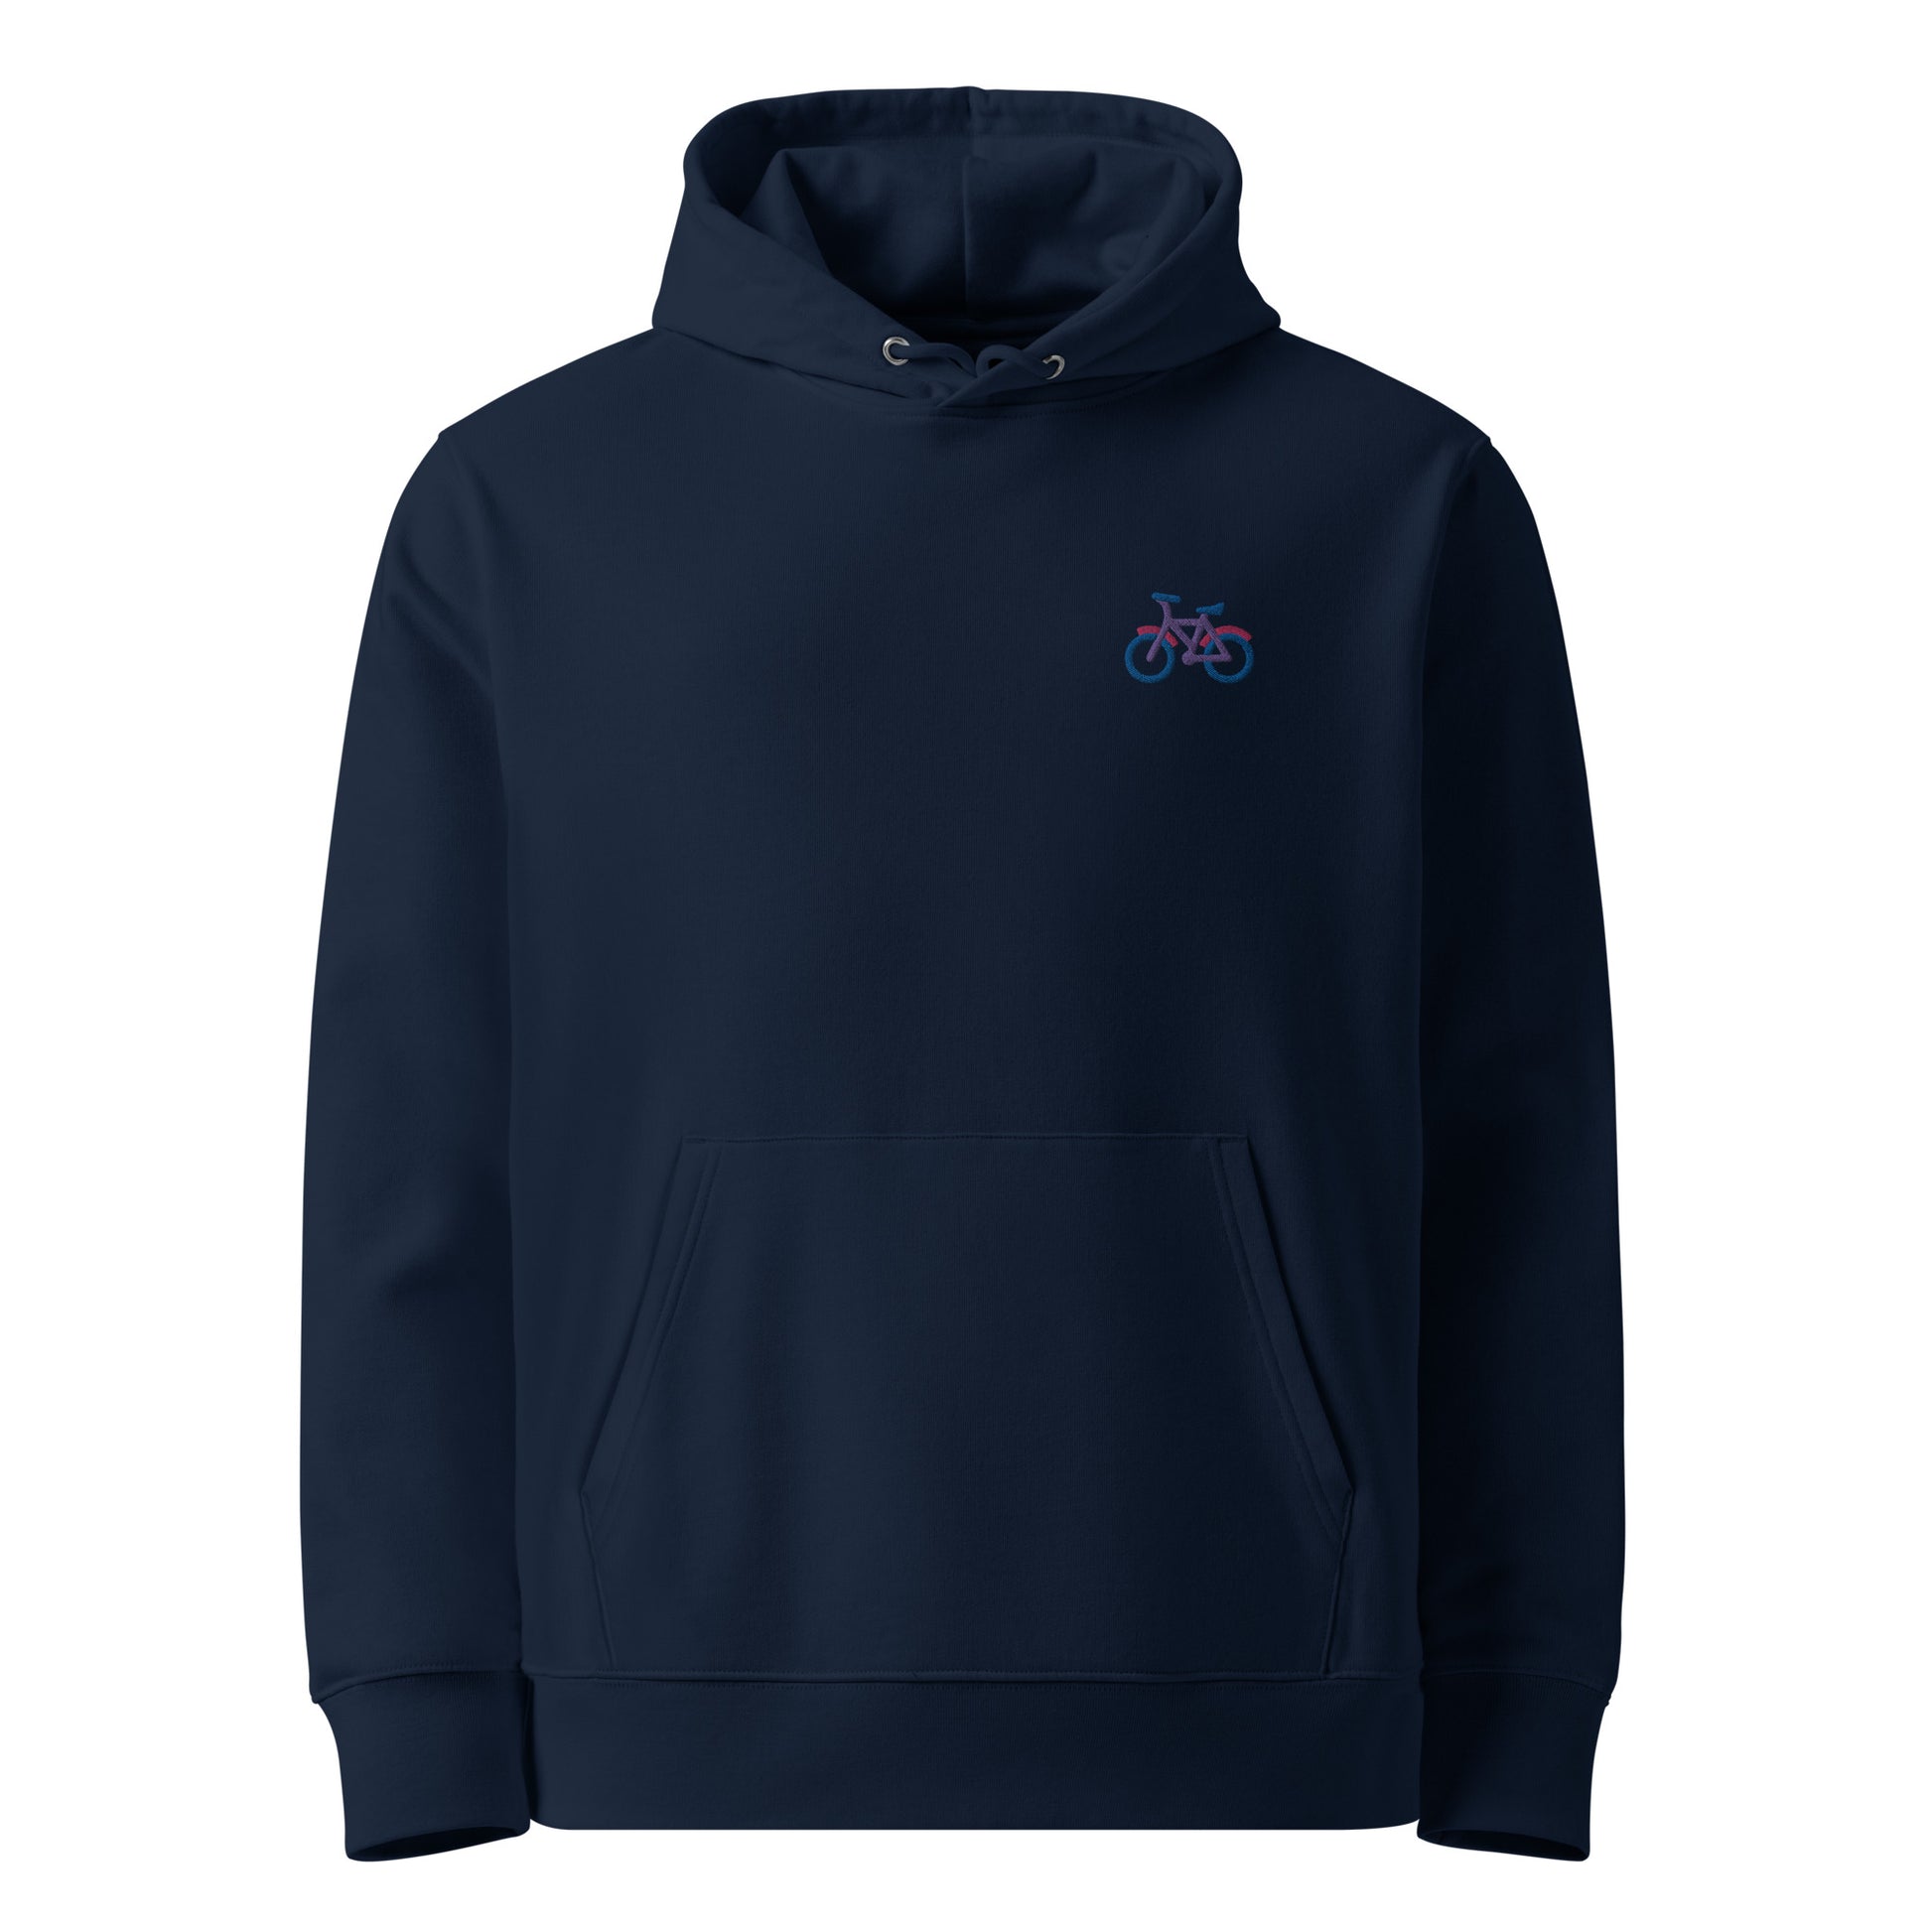 Unisex eco-friendly french navy hoodie featuring on the upper left chest; a subtle embroidered bicycle in bisexual colors, adding a touch of lgbtq to your outfit by putting the bi in bicycle. sizes: small, medium, large, extra large, double extra large.